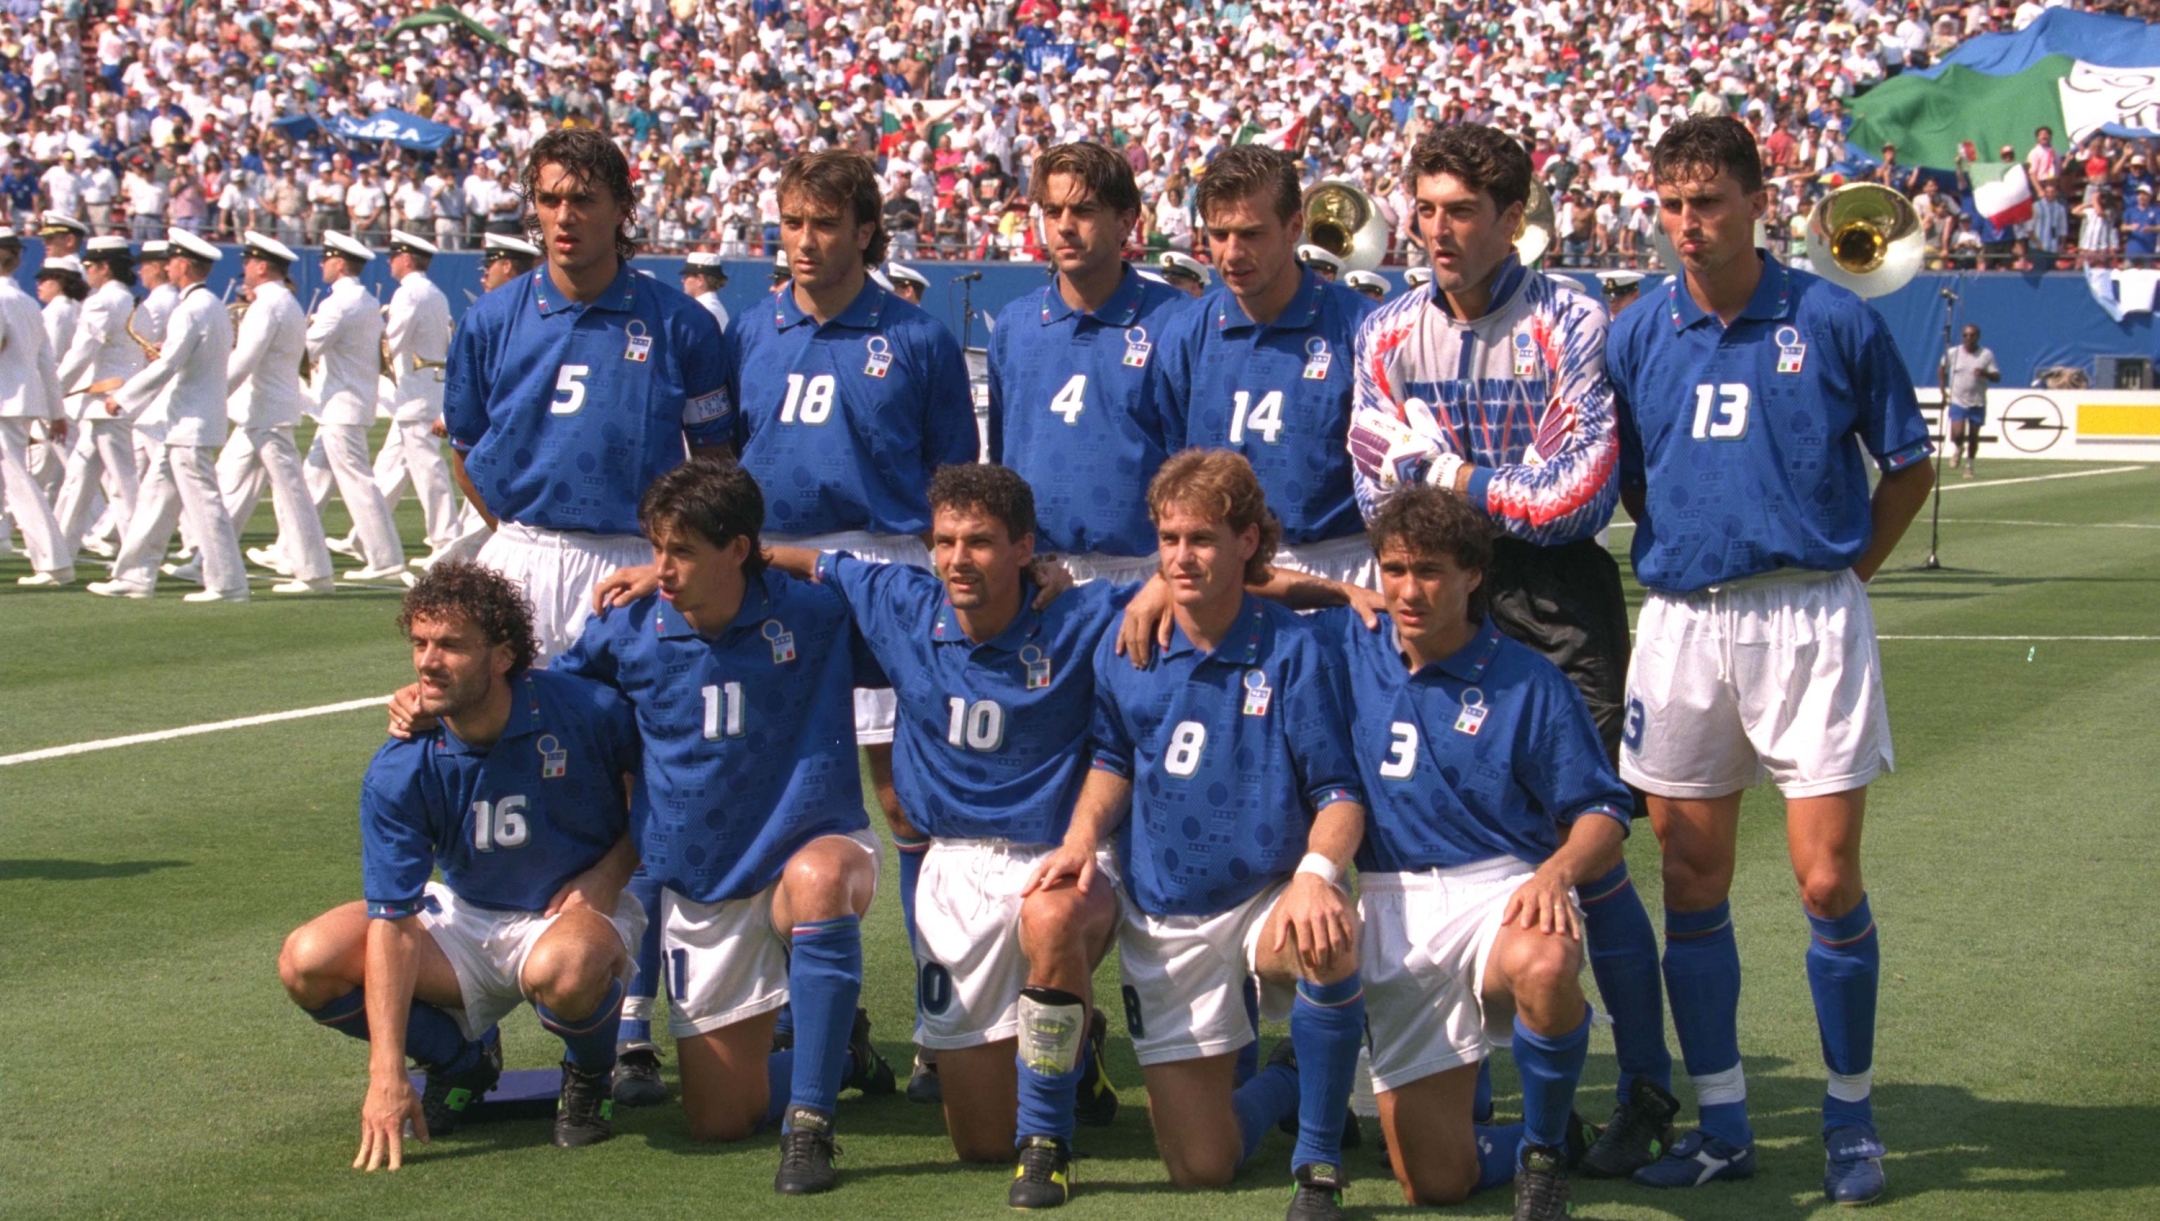 CAMPIONATO MONDIALE USA 1994. LA FORMAZIONE DELL' ITALIA ** FILE ** The Italian national soccer team line up before the start of their world cup semi-final soccer match against Bulgaria at Giant's Stadium, East Rutherford, N.J., on this Wednesday July 13 1994, file photo. From left, front row: Roberto Donadoni, Demetrio Albertini, Roberto Baggio, Roberto Mussi, Antonio Benarrivo. From left, back row: Paolo Maldini, Pierluigi Casiraghi, Alessandro Costacurta, Nicola Berti, Gianluca Pagliuchi and Dino Baggio. Italy defeated Bulgaria 2-1 and will n ow play Brazil in the finals of the World Cup on Sunday, July 17 at the Rose Bowl in Pasadena, CA.